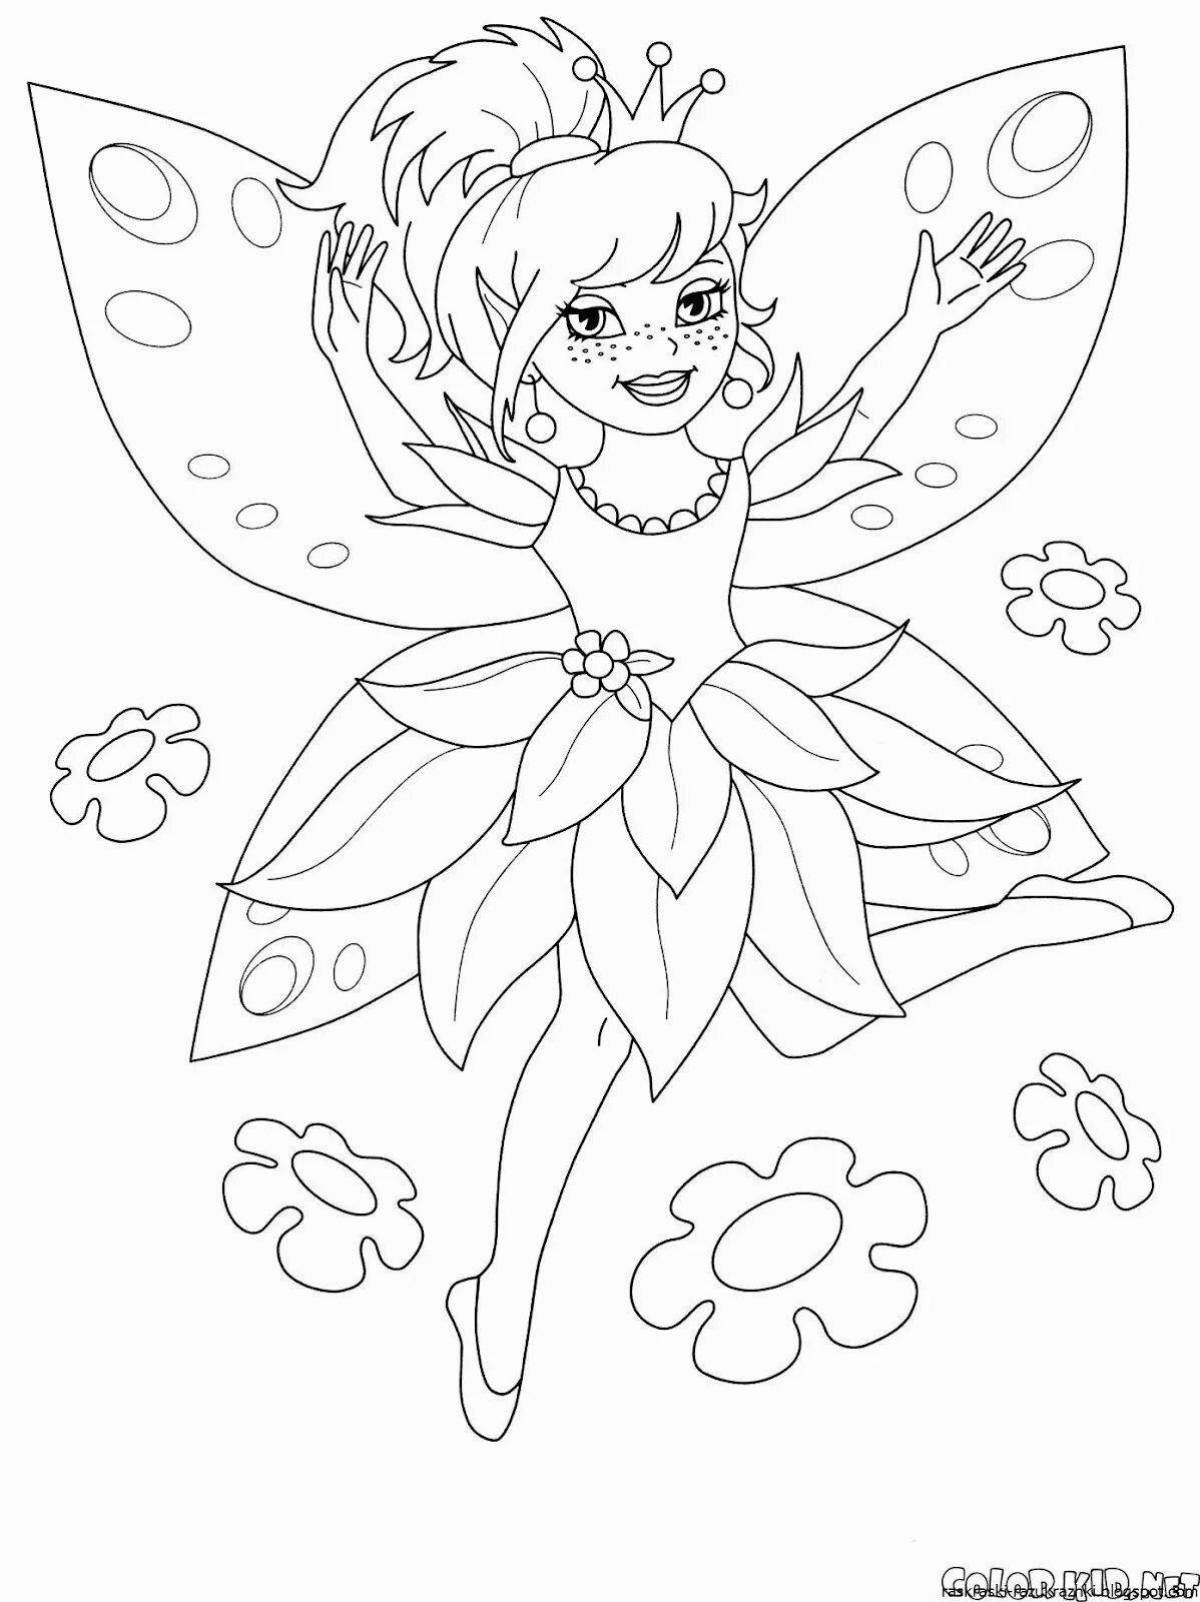 Exquisite princess coloring pages for girls 6 years old